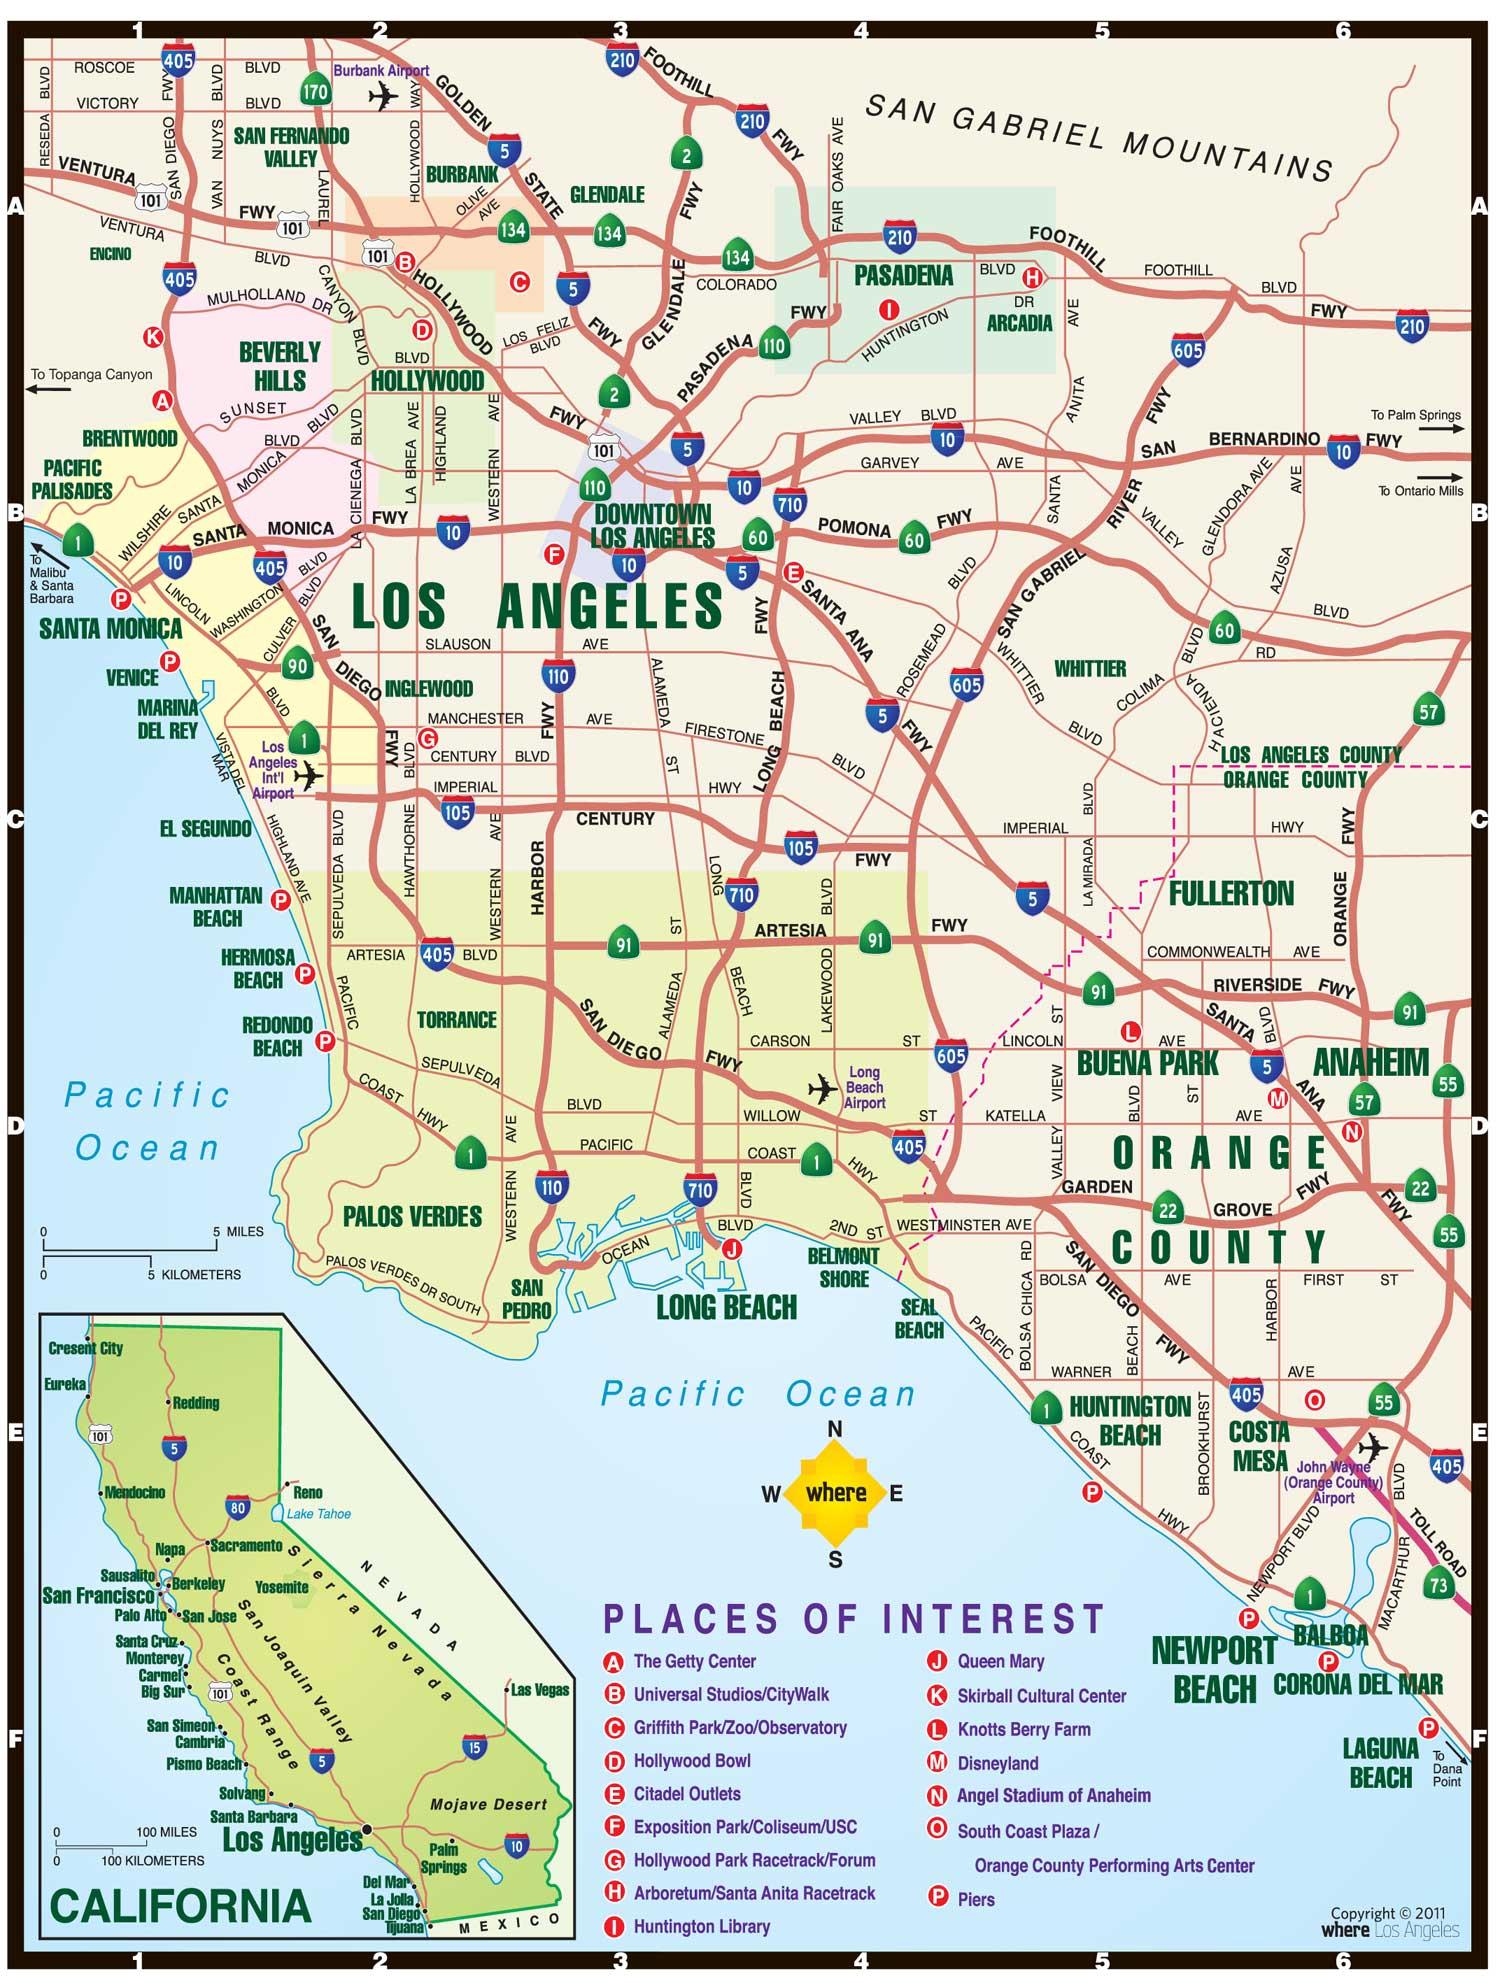 map-of-los-angeles-offline-map-and-detailed-map-of-los-angeles-city